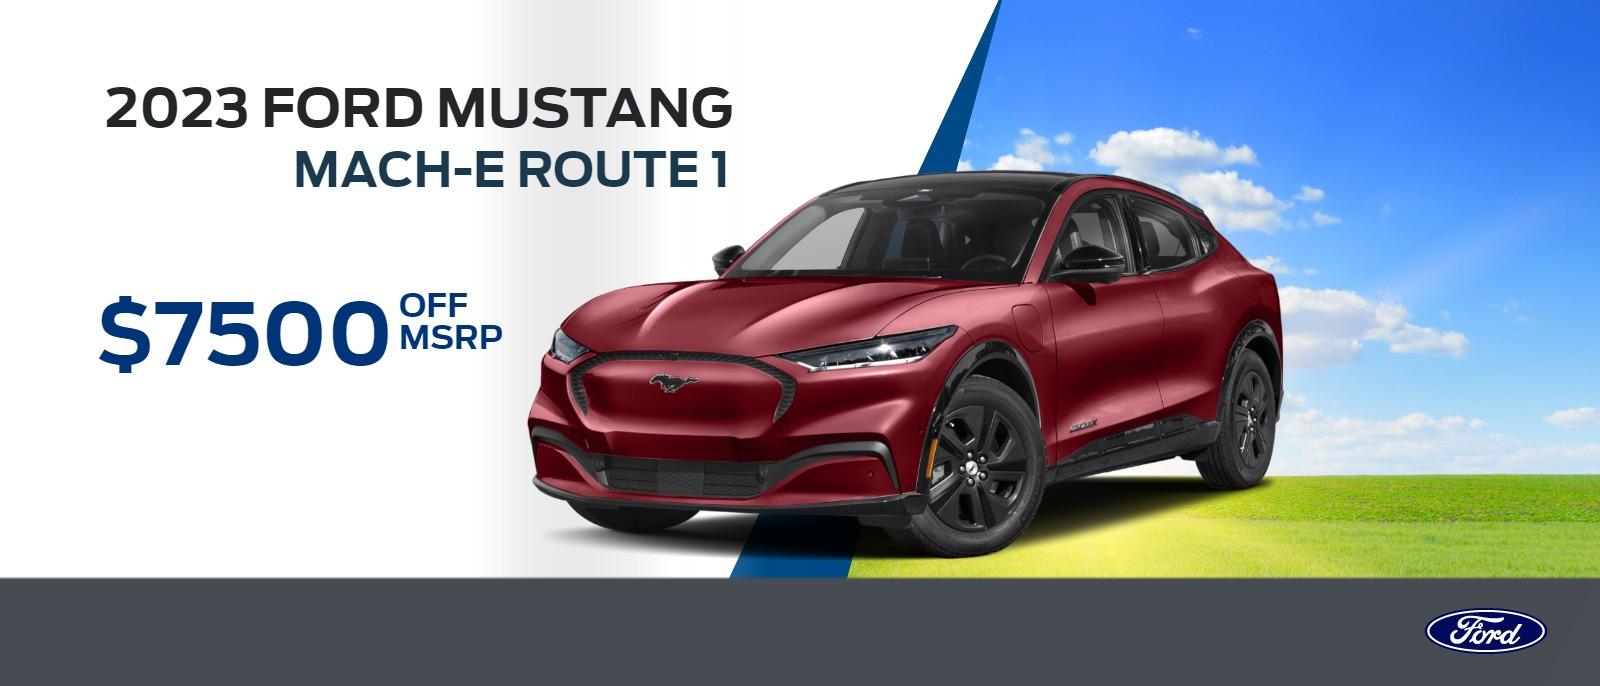 2023 Ford Mustang Mach-e Route 1
$7500 Off MSRP